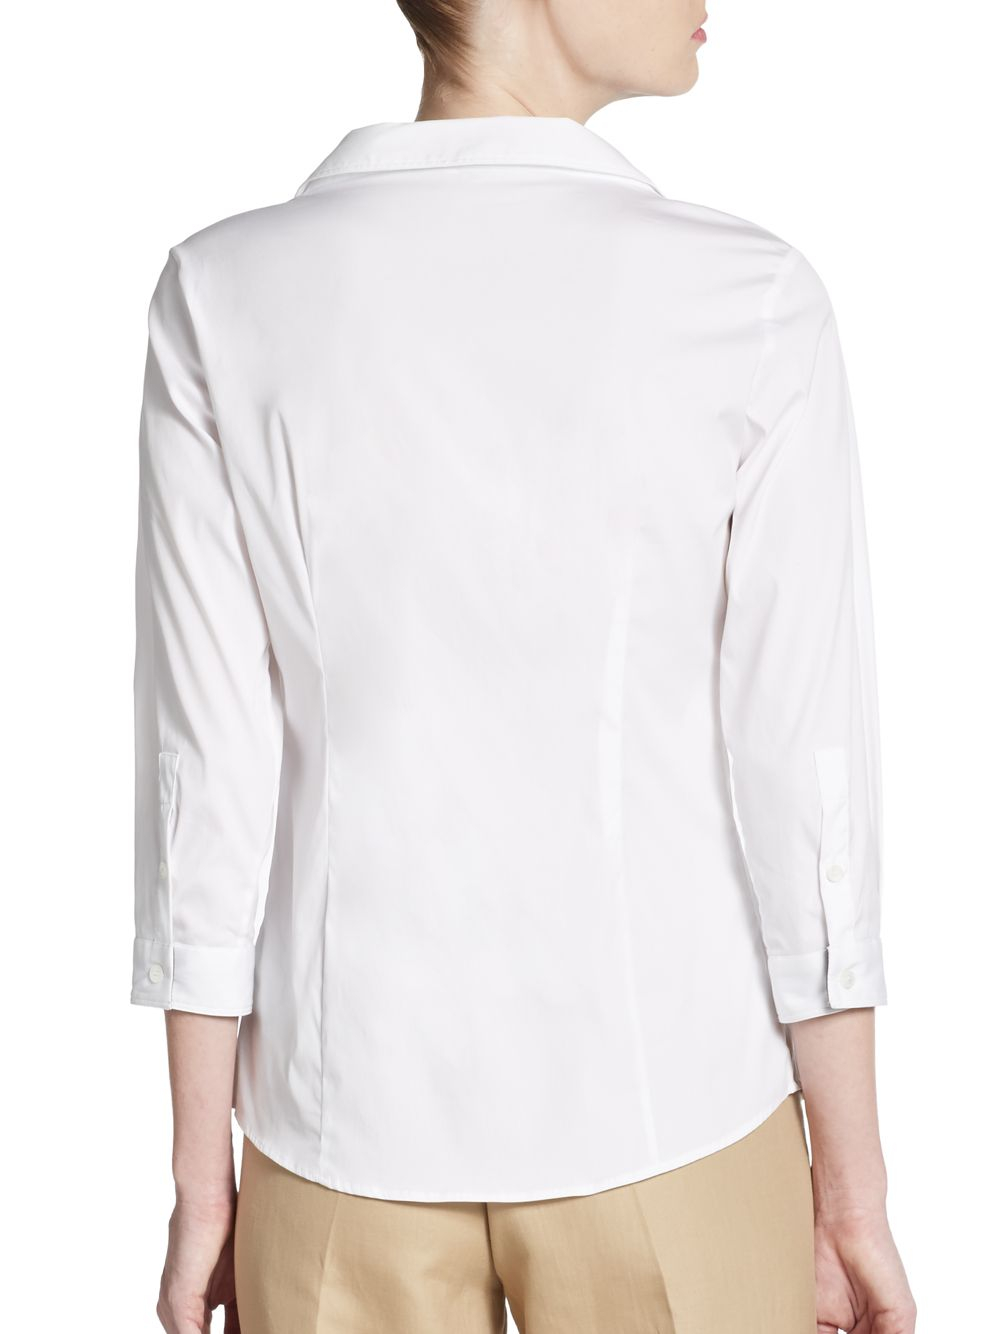 Burberry Stretch-Cotton Portrait Collar Top in White - Lyst